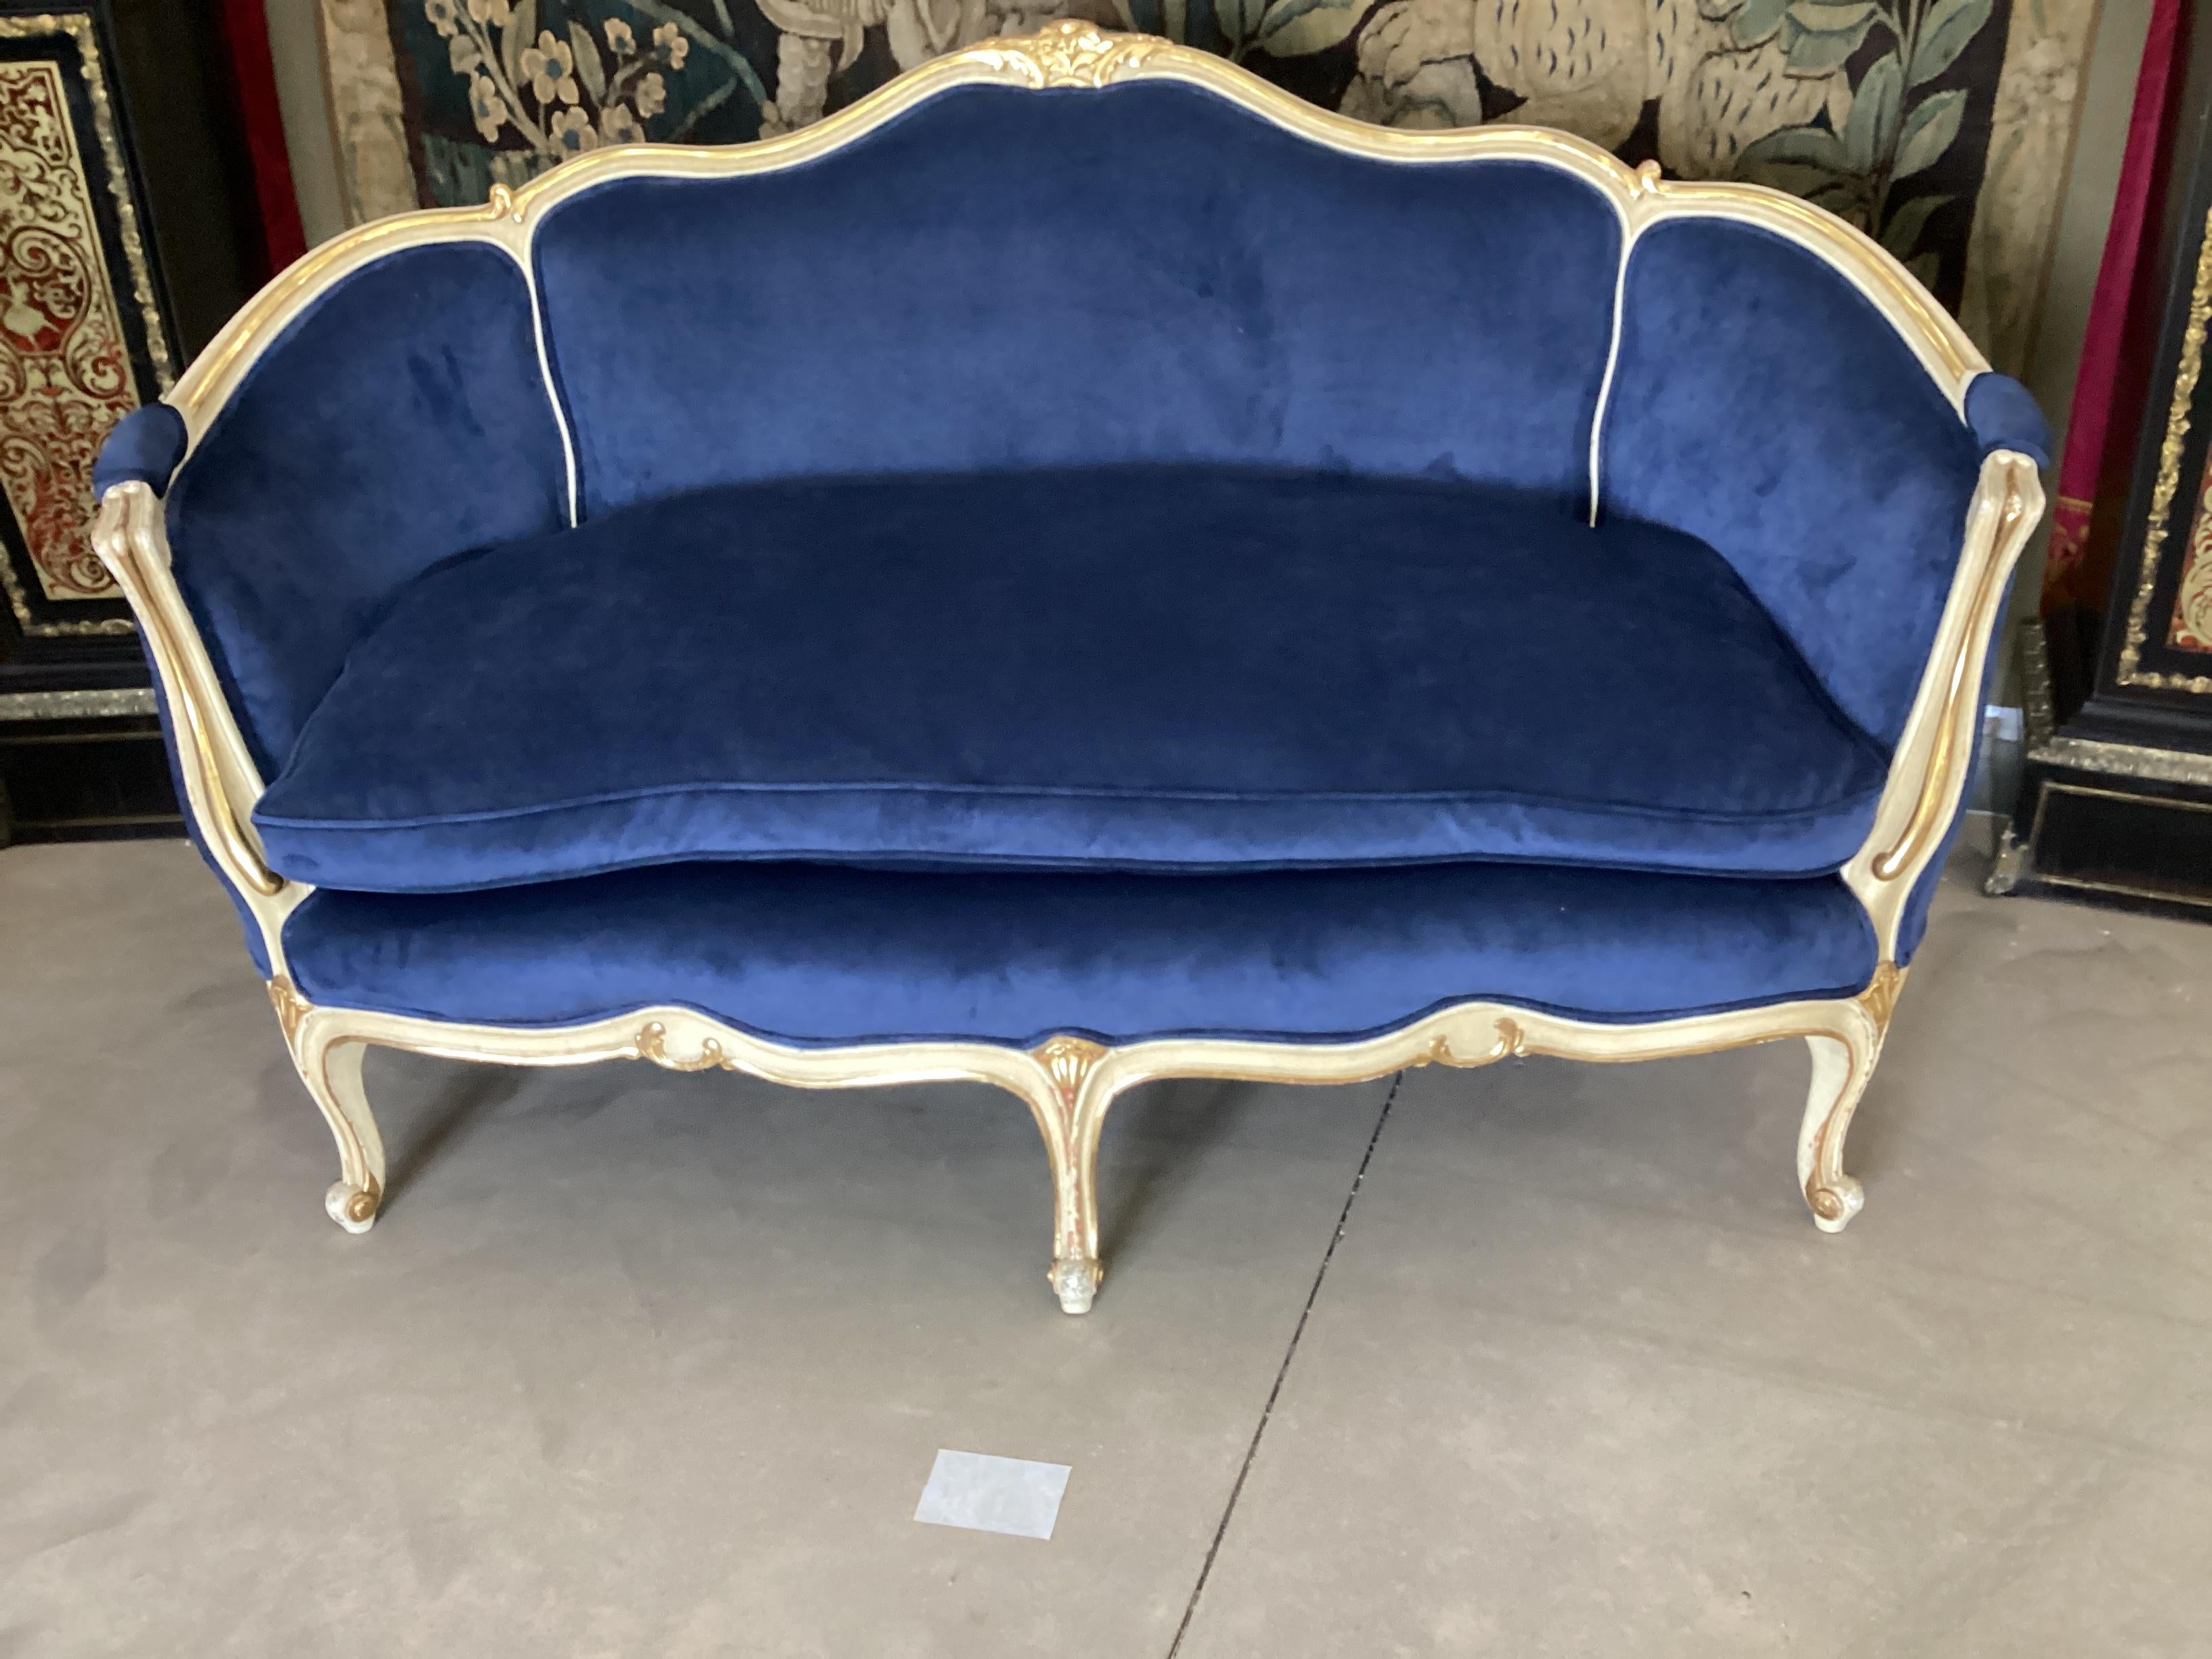 Antique Louis XV Style Painted and Gilt Settee. This is one of a pair and priced individually. Newly upholstered in a blue velvet fabric. Cream painted frame with gilt accents on typical 
Louis  XV  style scrolling legs. The pair would look great in